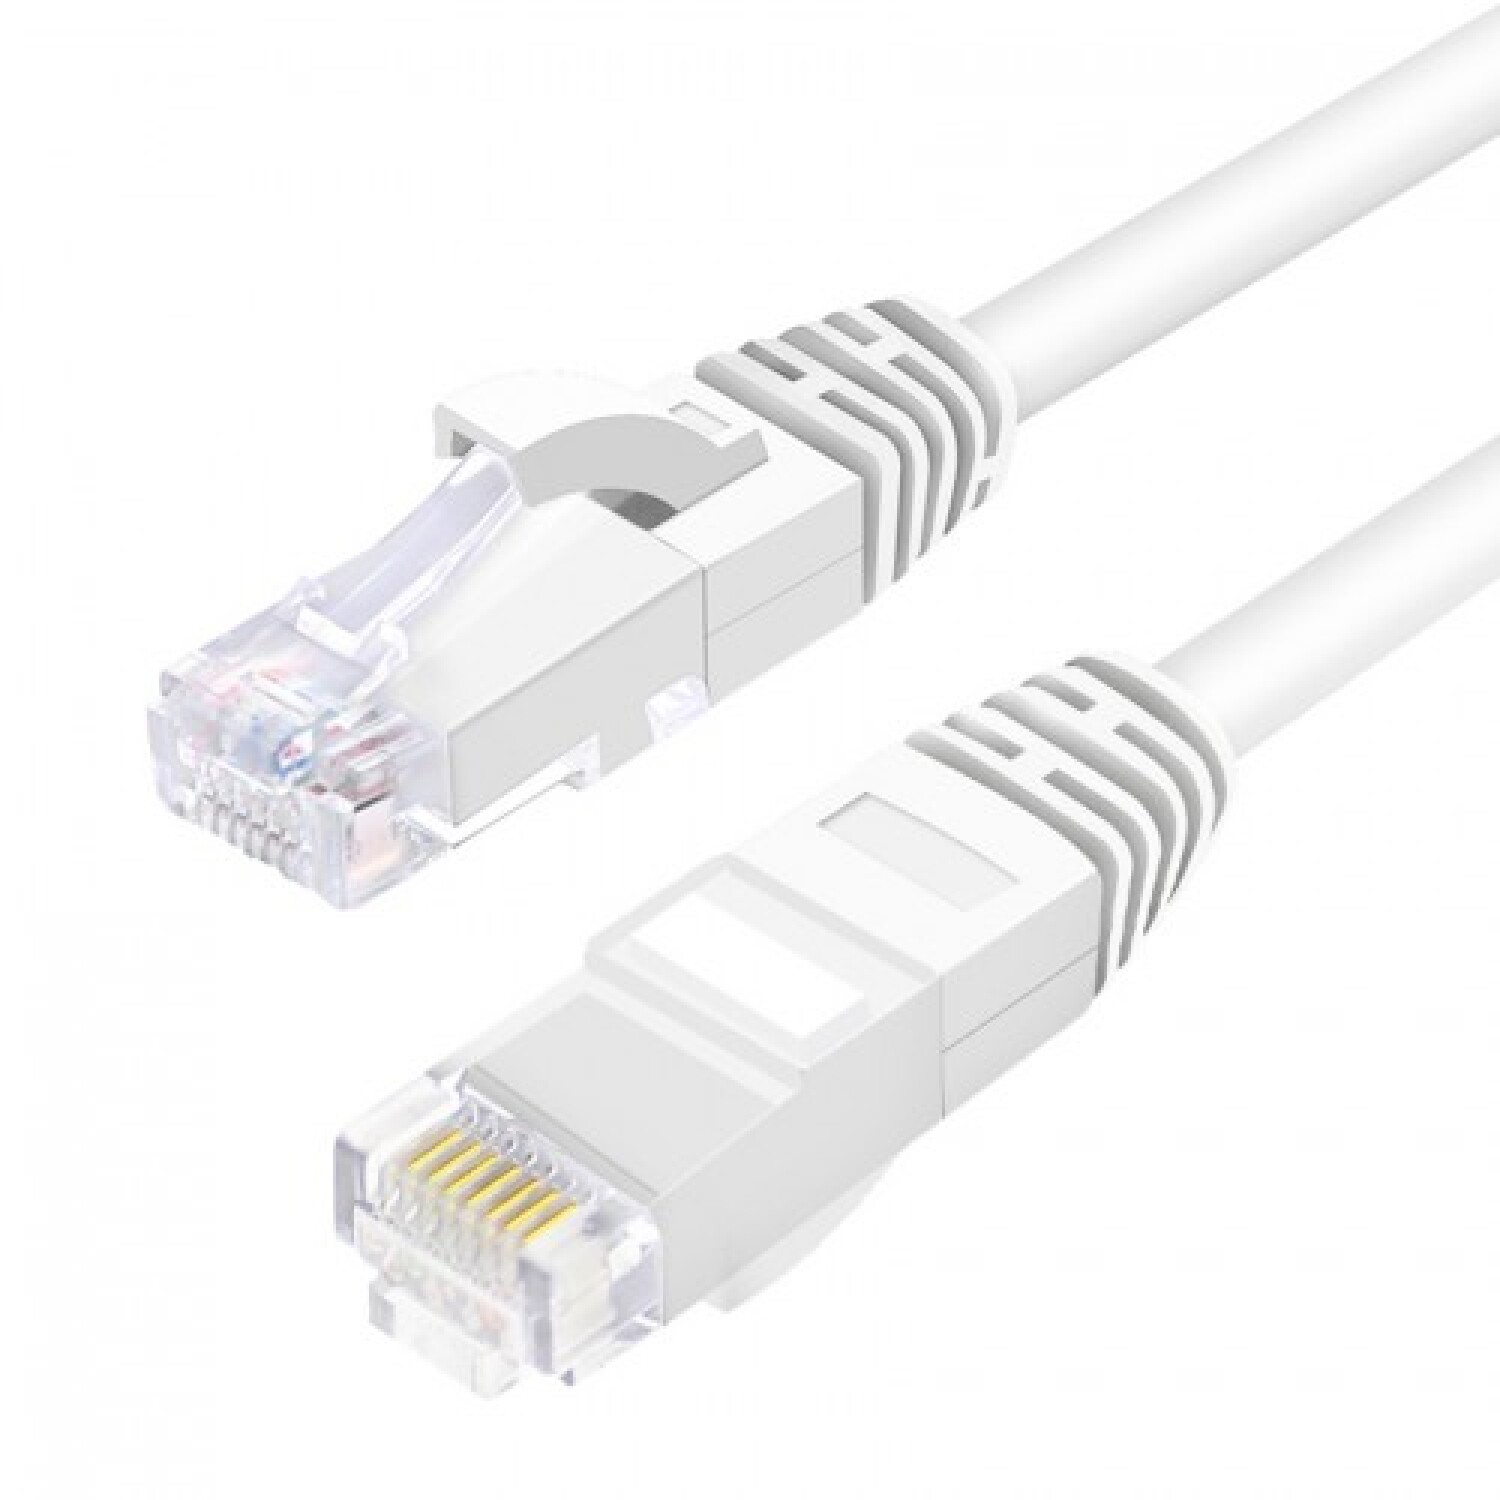 Cable Red Plano Cat 7 20 Metros Rj45 Utp Ethernet 600 Mhz